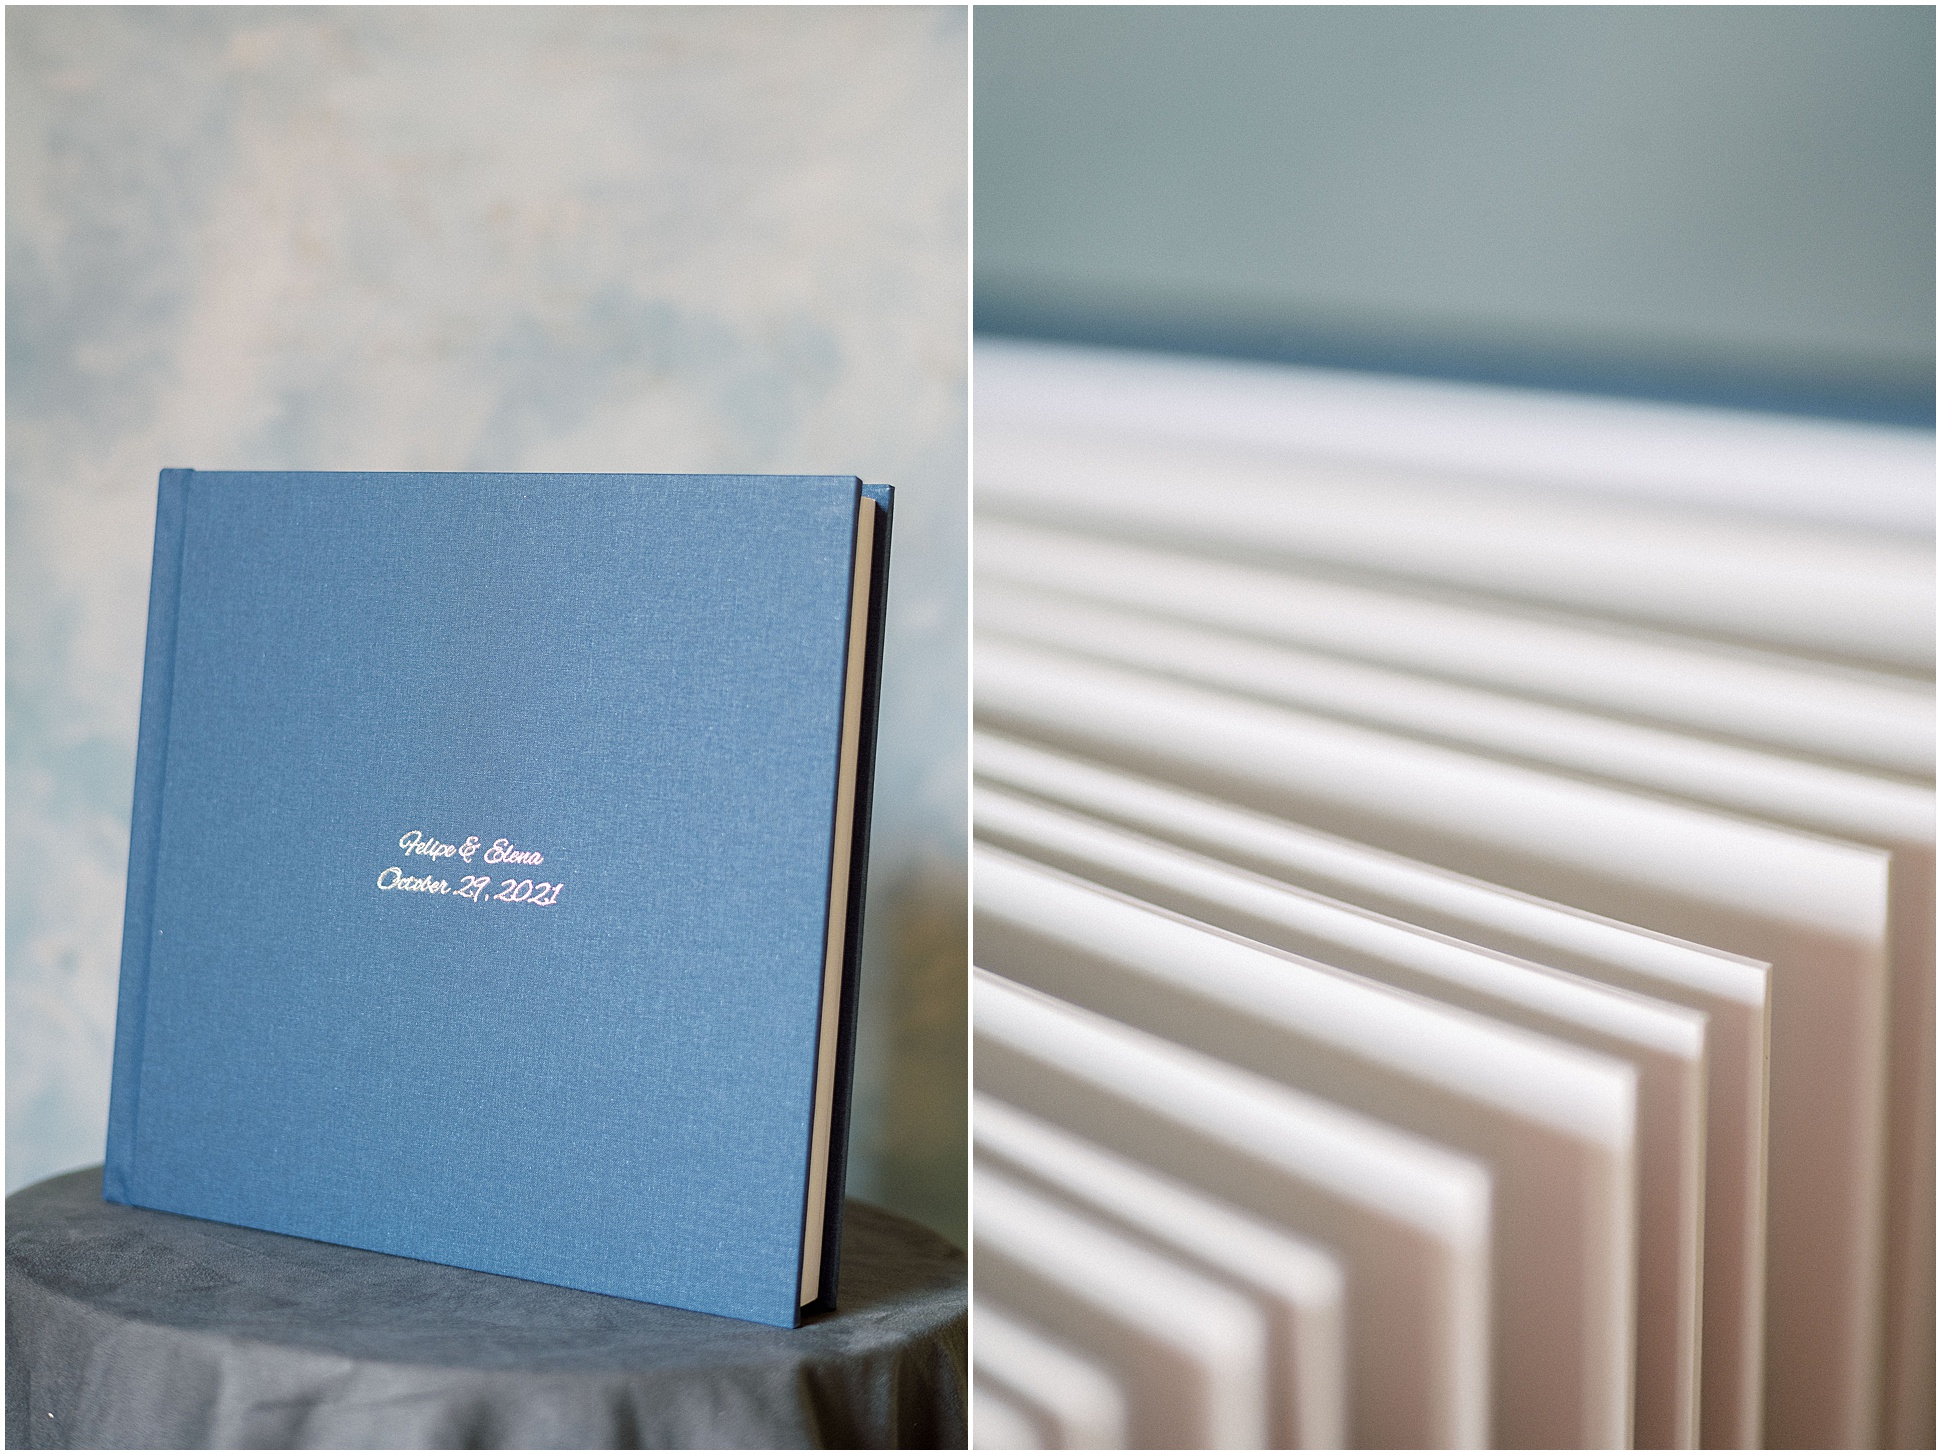 Intricately designed wedding album filled with stunning memories